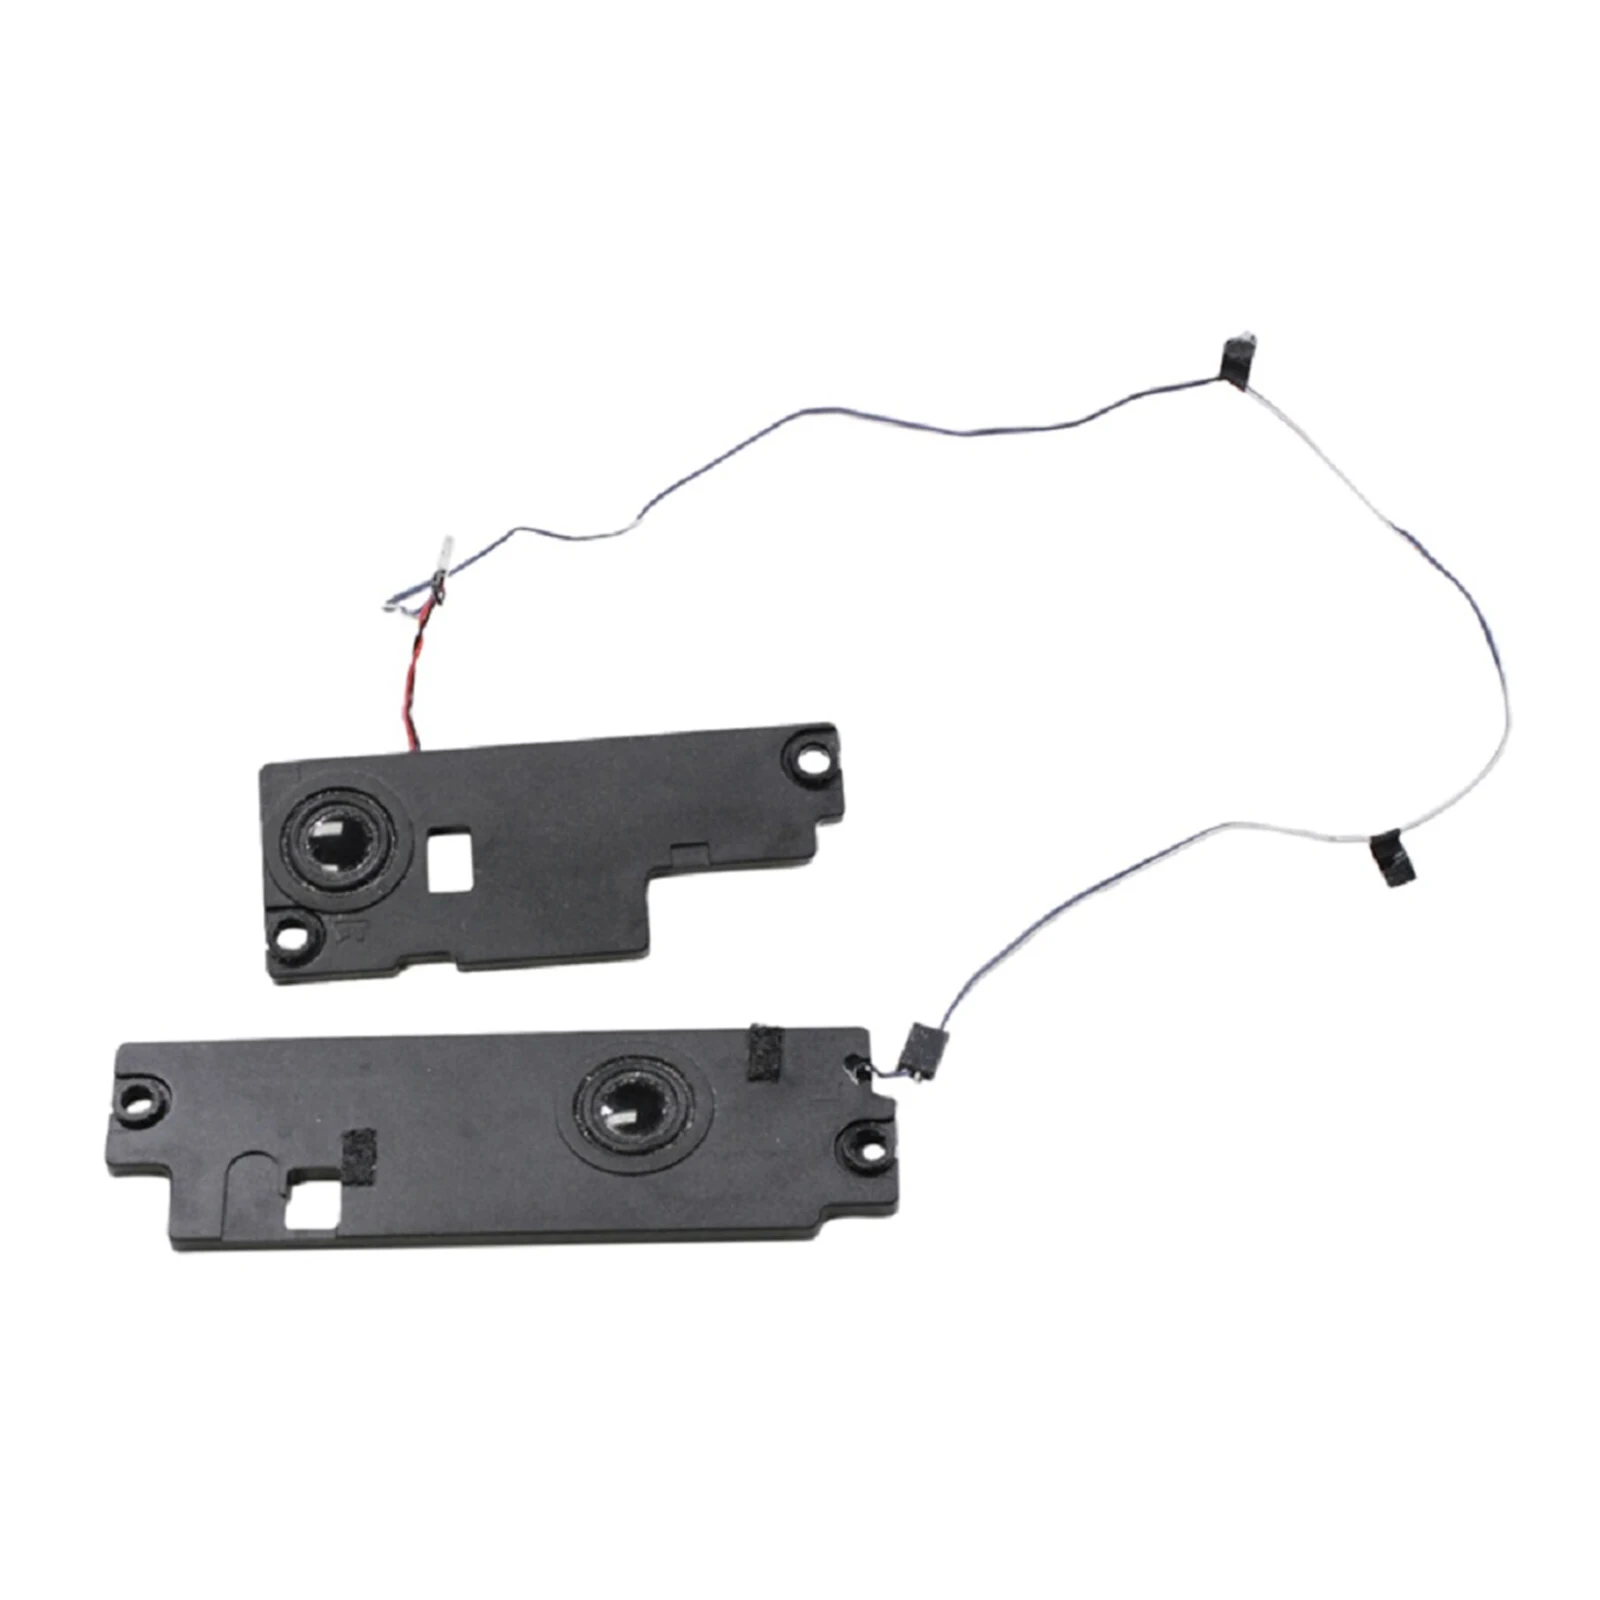 

2 Packs Built in Speakers Compact Part Replacement Internal Audio Speakers Loudspeaker for Dell E6510 A09B09 Tablets Computers